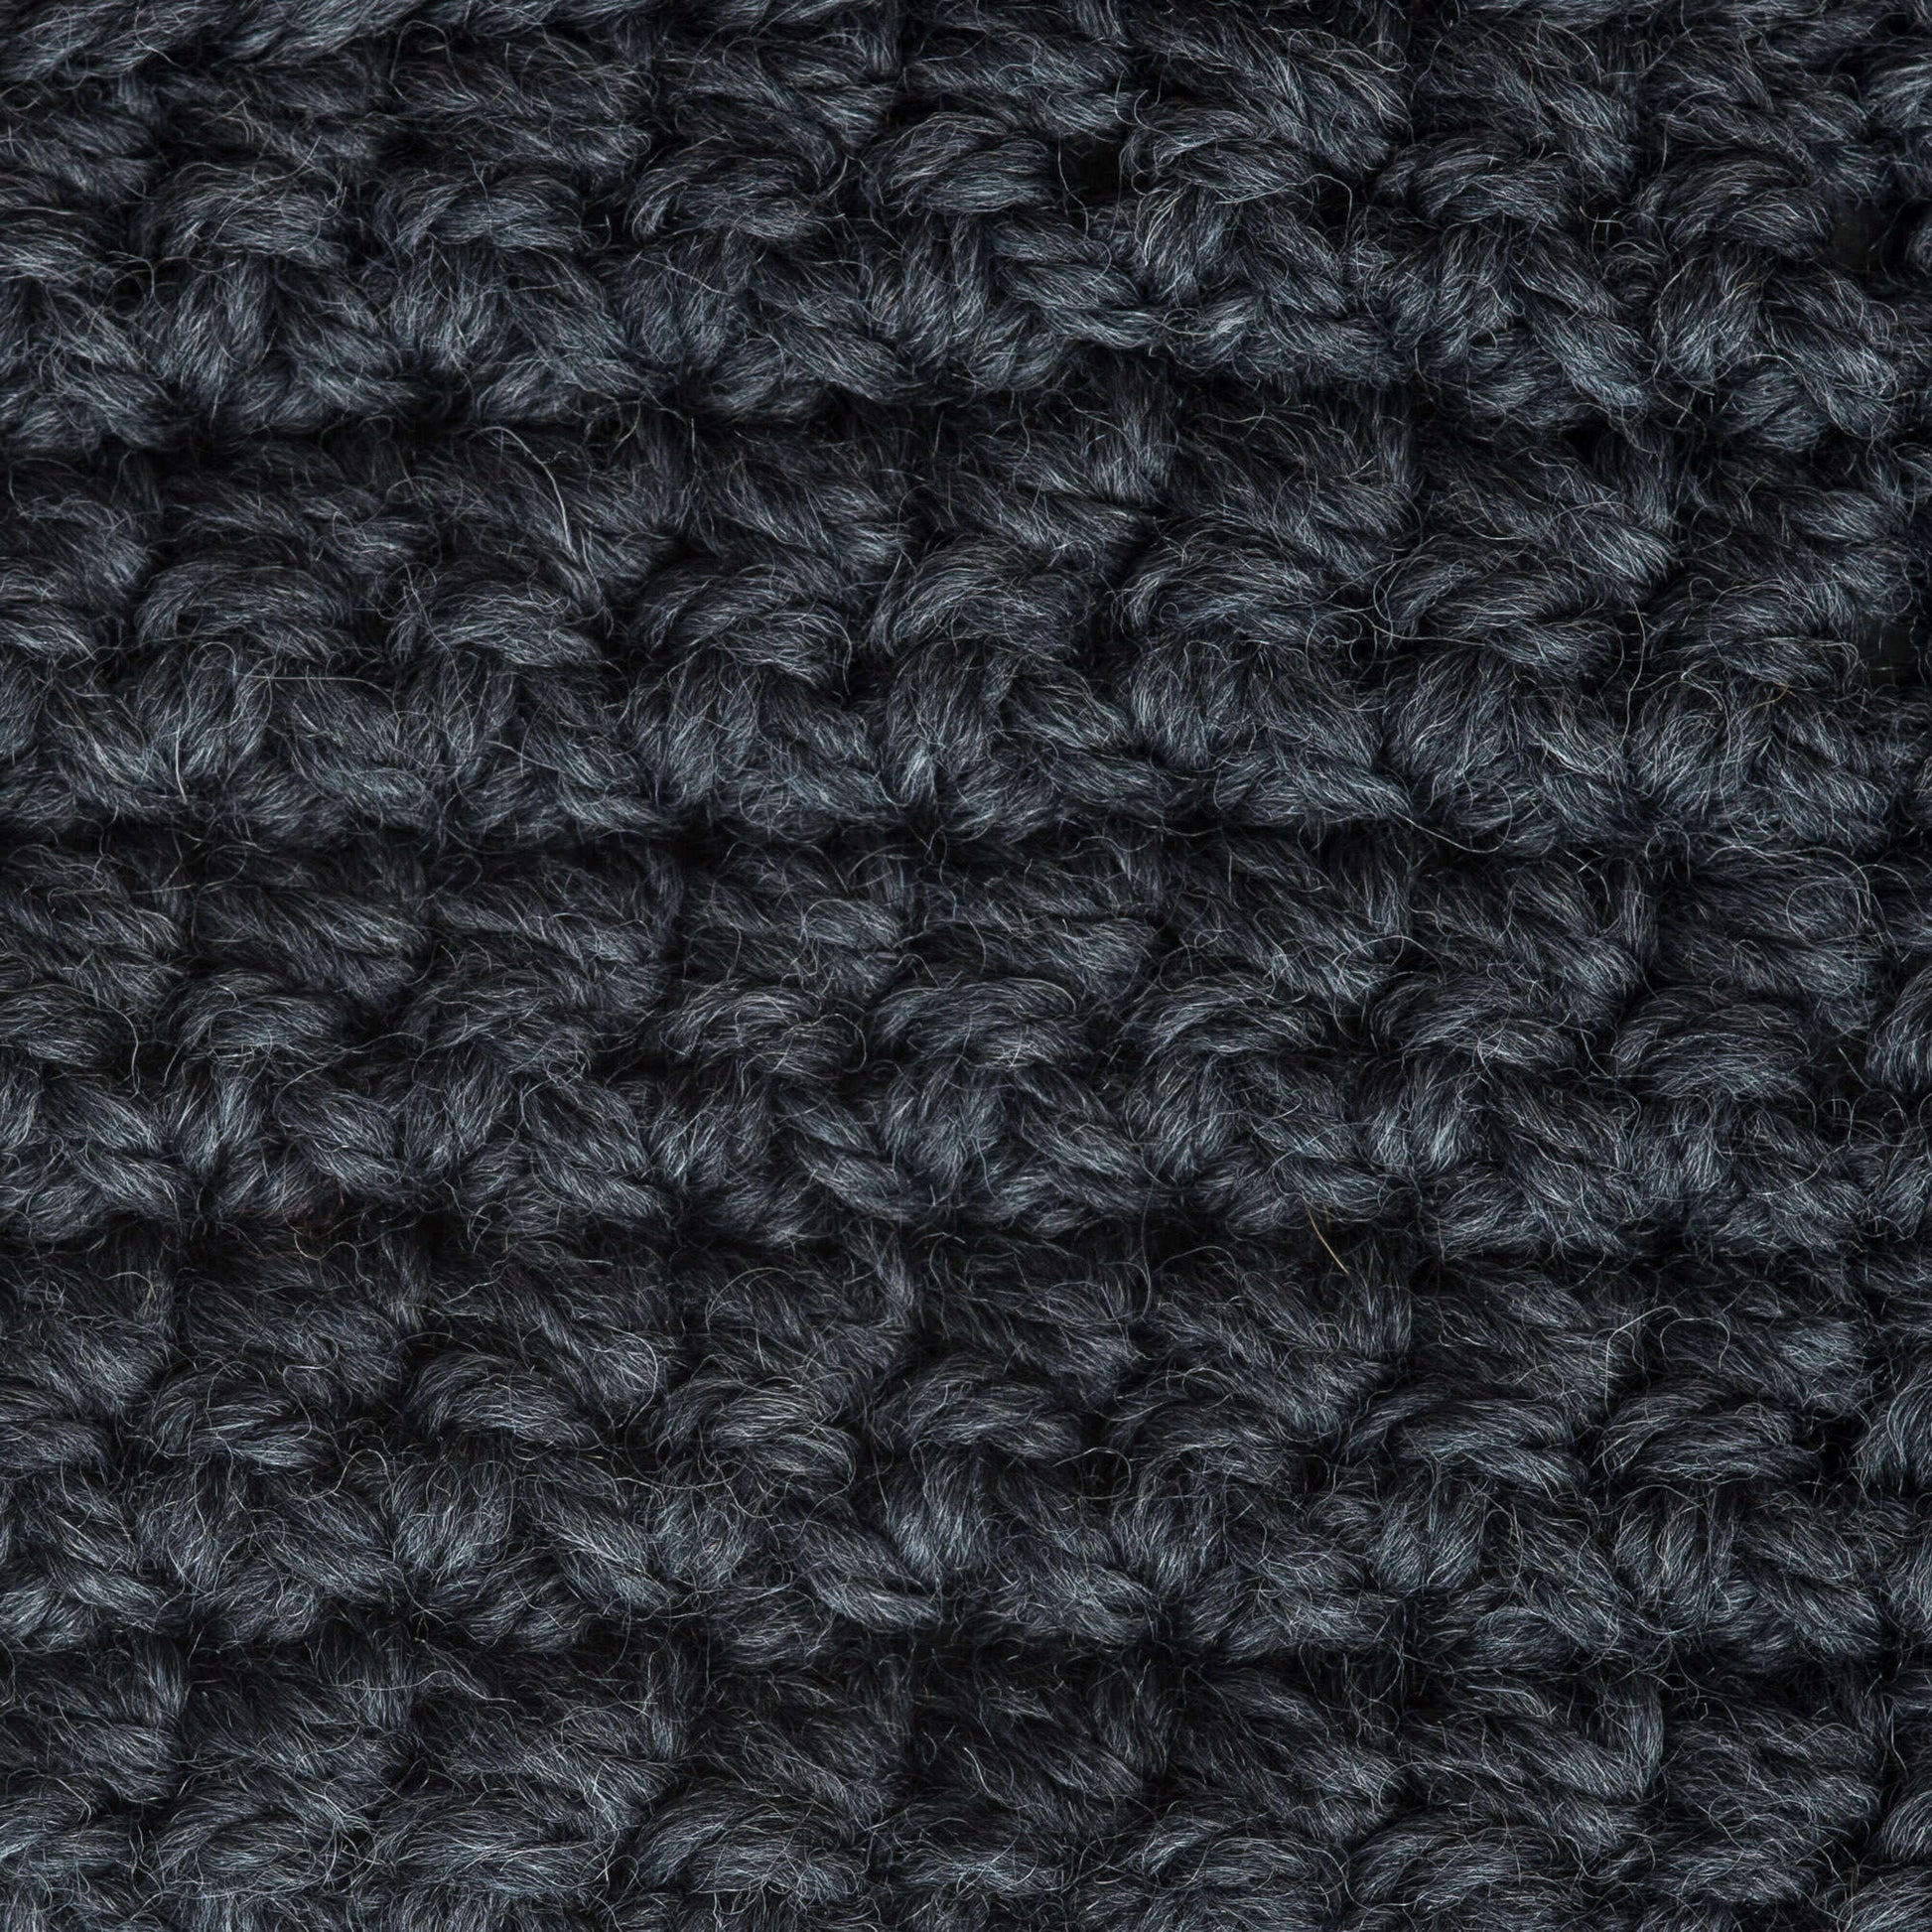 Patons Classic Wool Bulky Yarn - Discontinued Shades